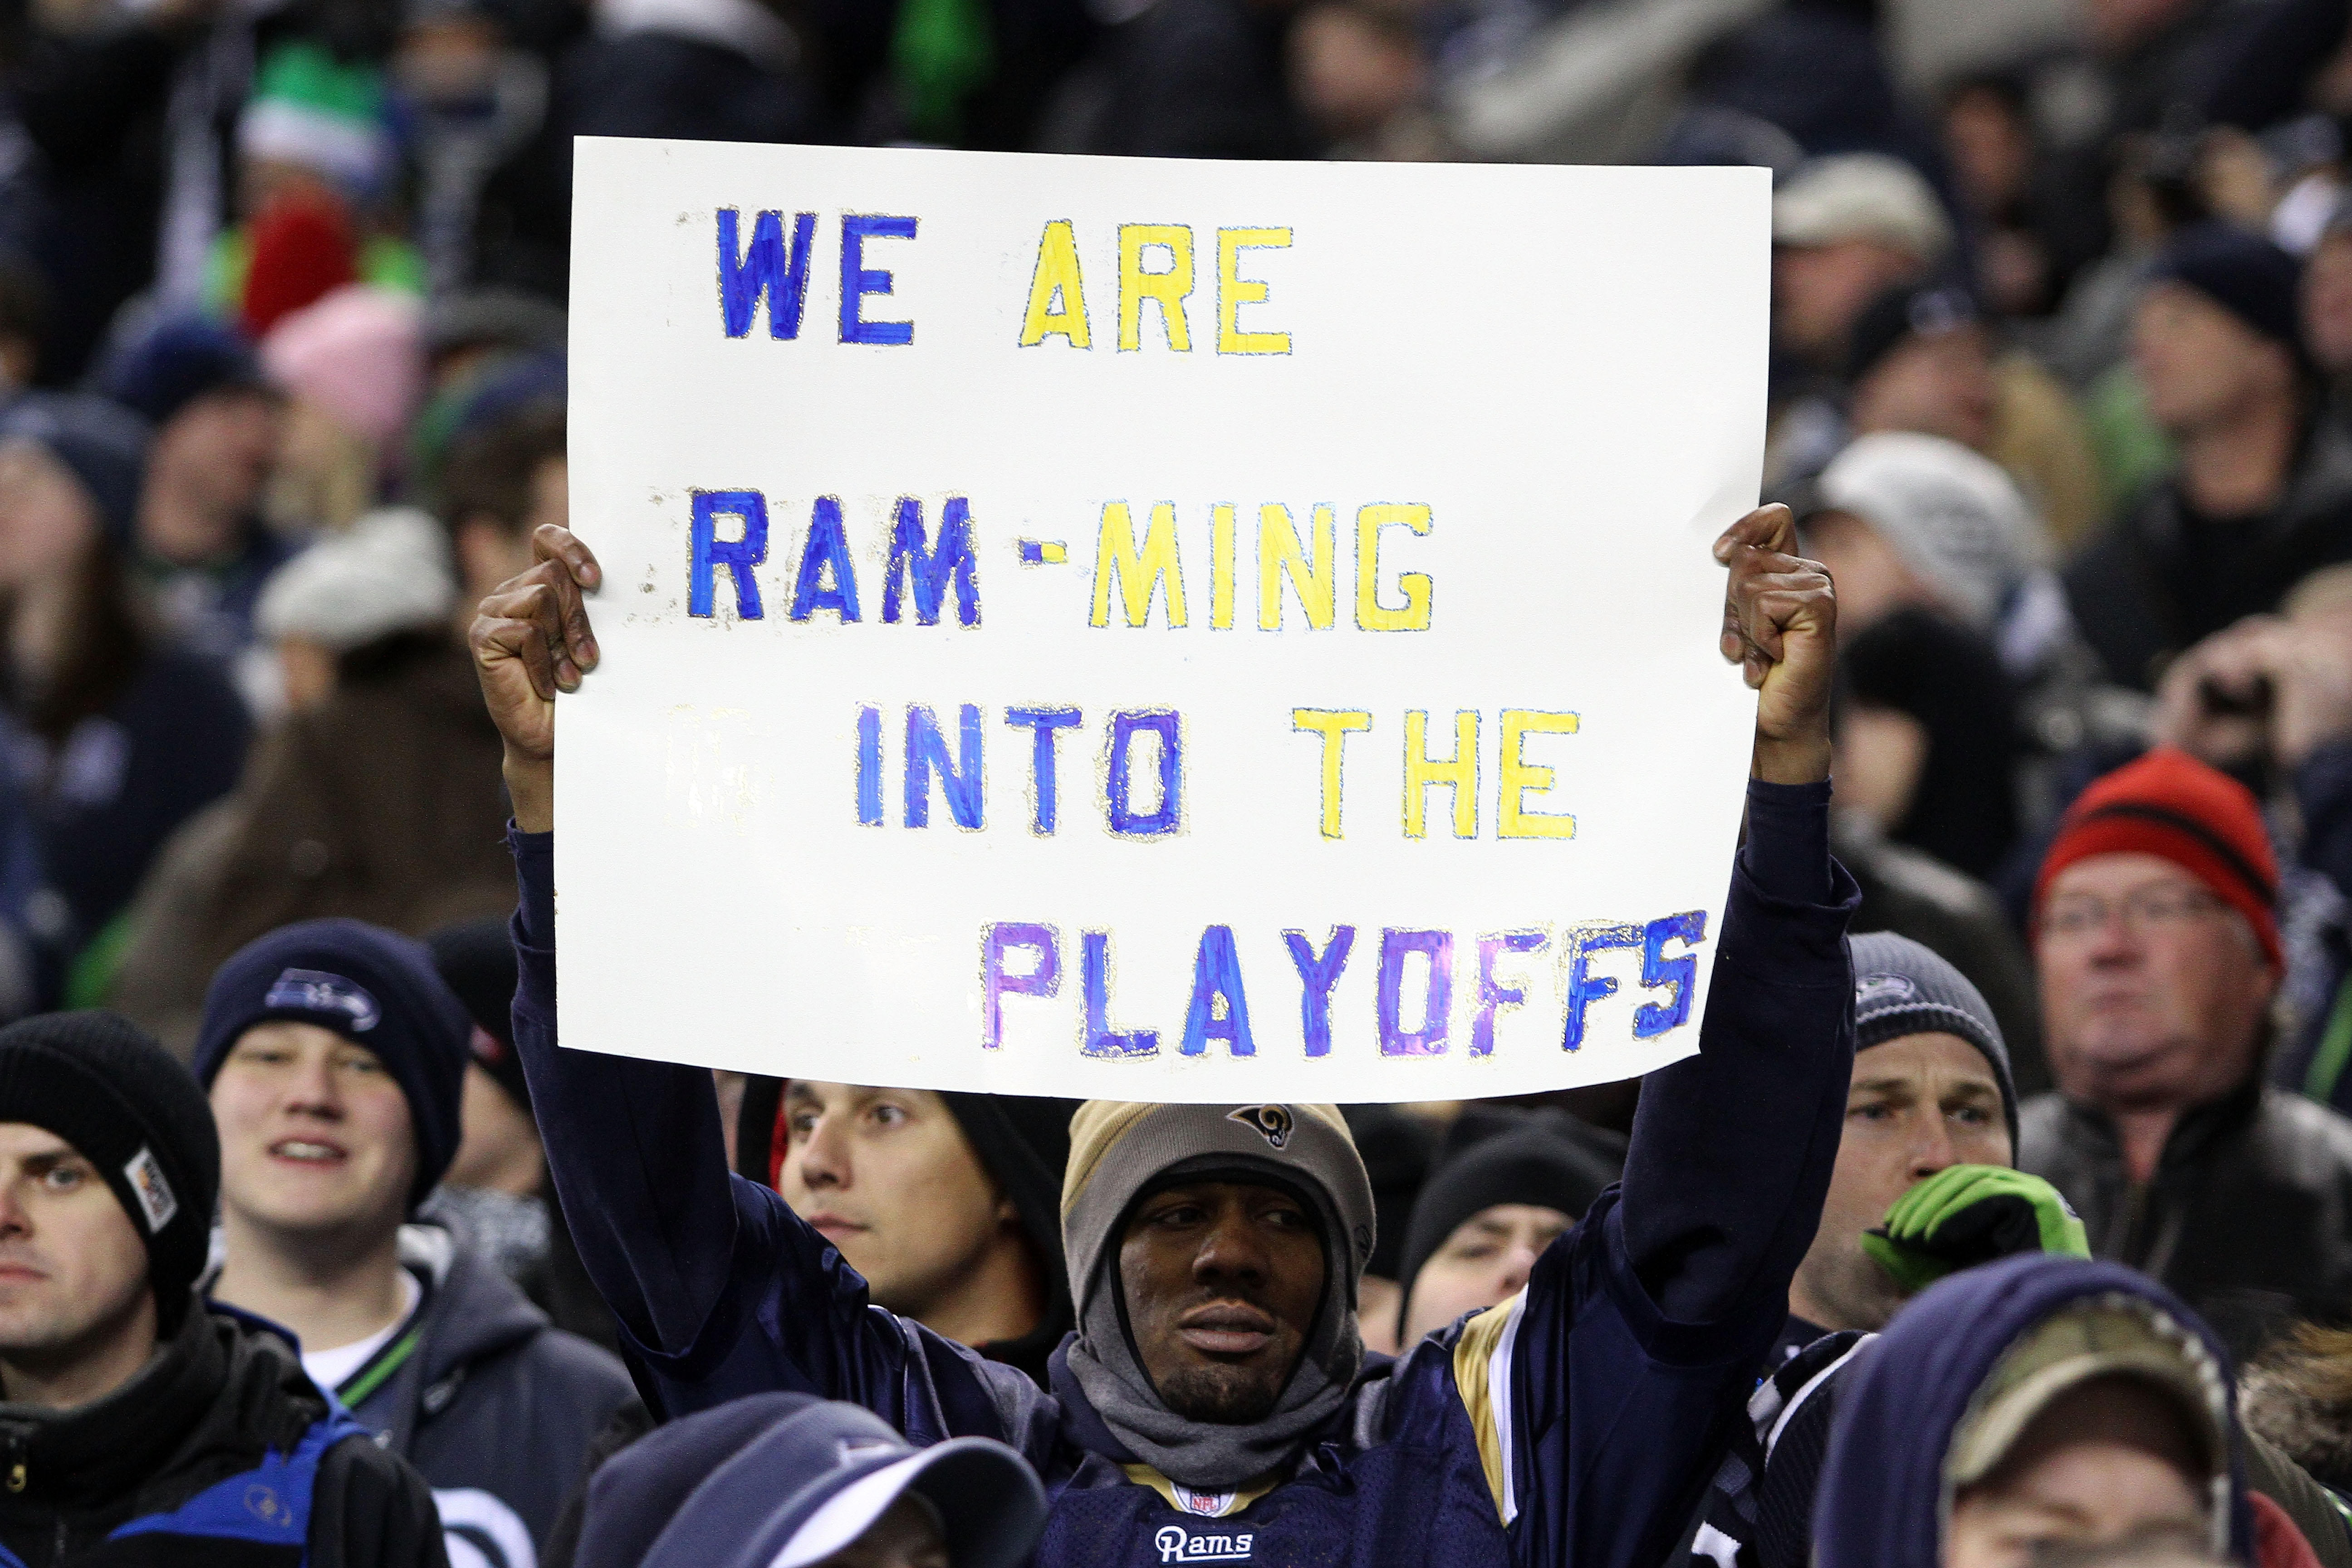 SEATTLE, WA - JANUARY 02:  A fan of the St. Louis Rams holds a sign during the game against the Seattle Seahawks at Qwest Field on January 2, 2011 in Seattle, Washington.  (Photo by Otto Greule Jr/Getty Images)